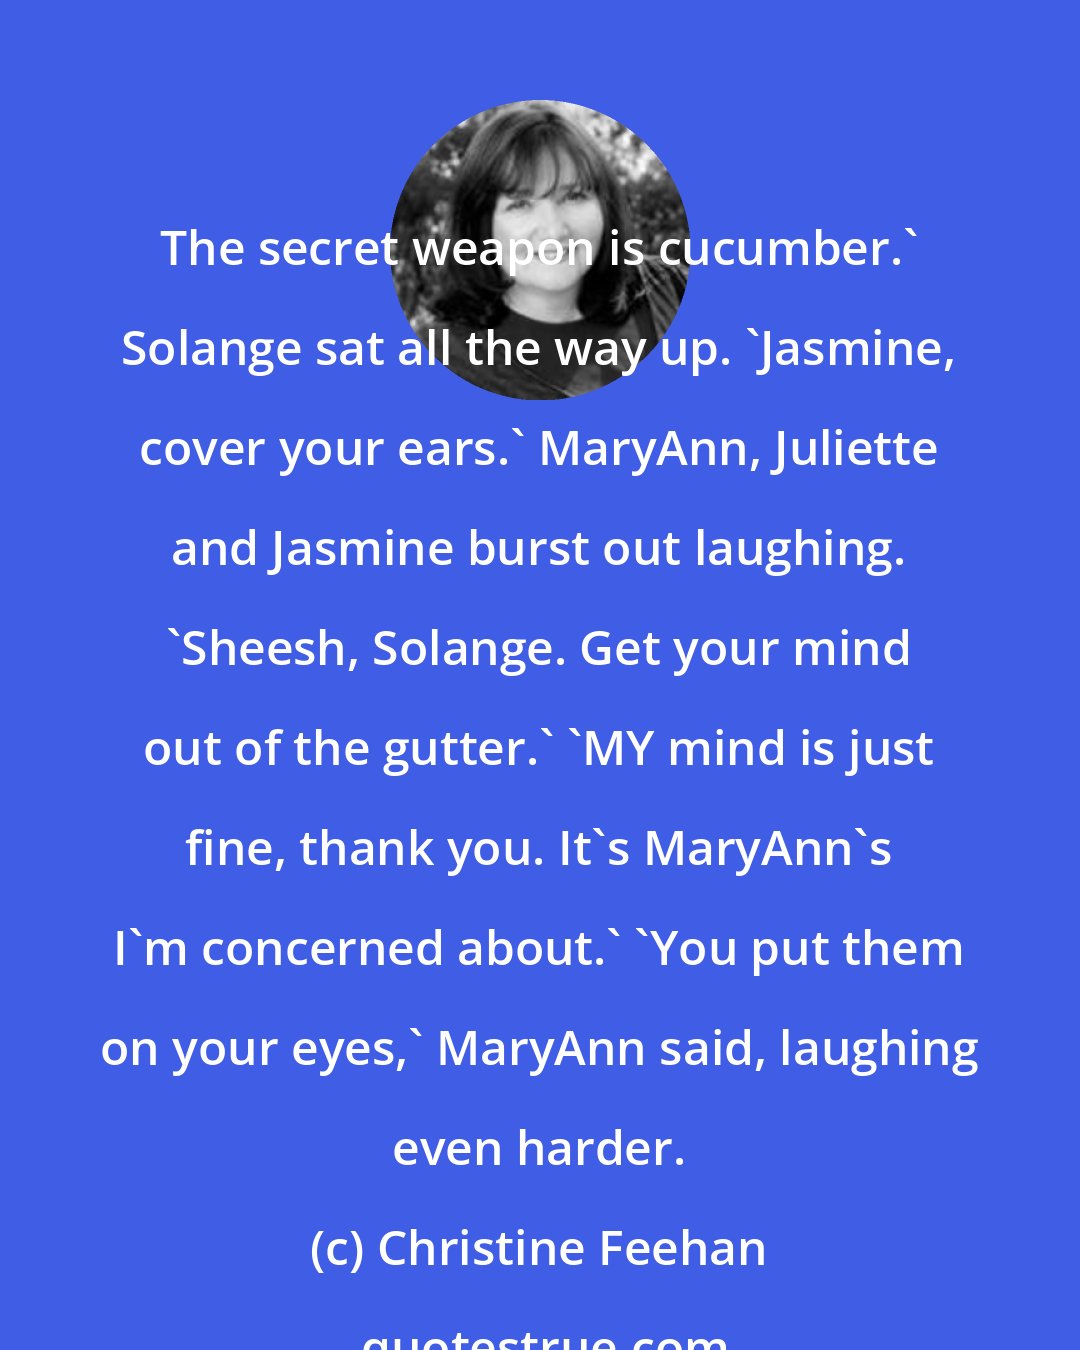 Christine Feehan: The secret weapon is cucumber.' Solange sat all the way up. 'Jasmine, cover your ears.' MaryAnn, Juliette and Jasmine burst out laughing. 'Sheesh, Solange. Get your mind out of the gutter.' 'MY mind is just fine, thank you. It's MaryAnn's I'm concerned about.' 'You put them on your eyes,' MaryAnn said, laughing even harder.